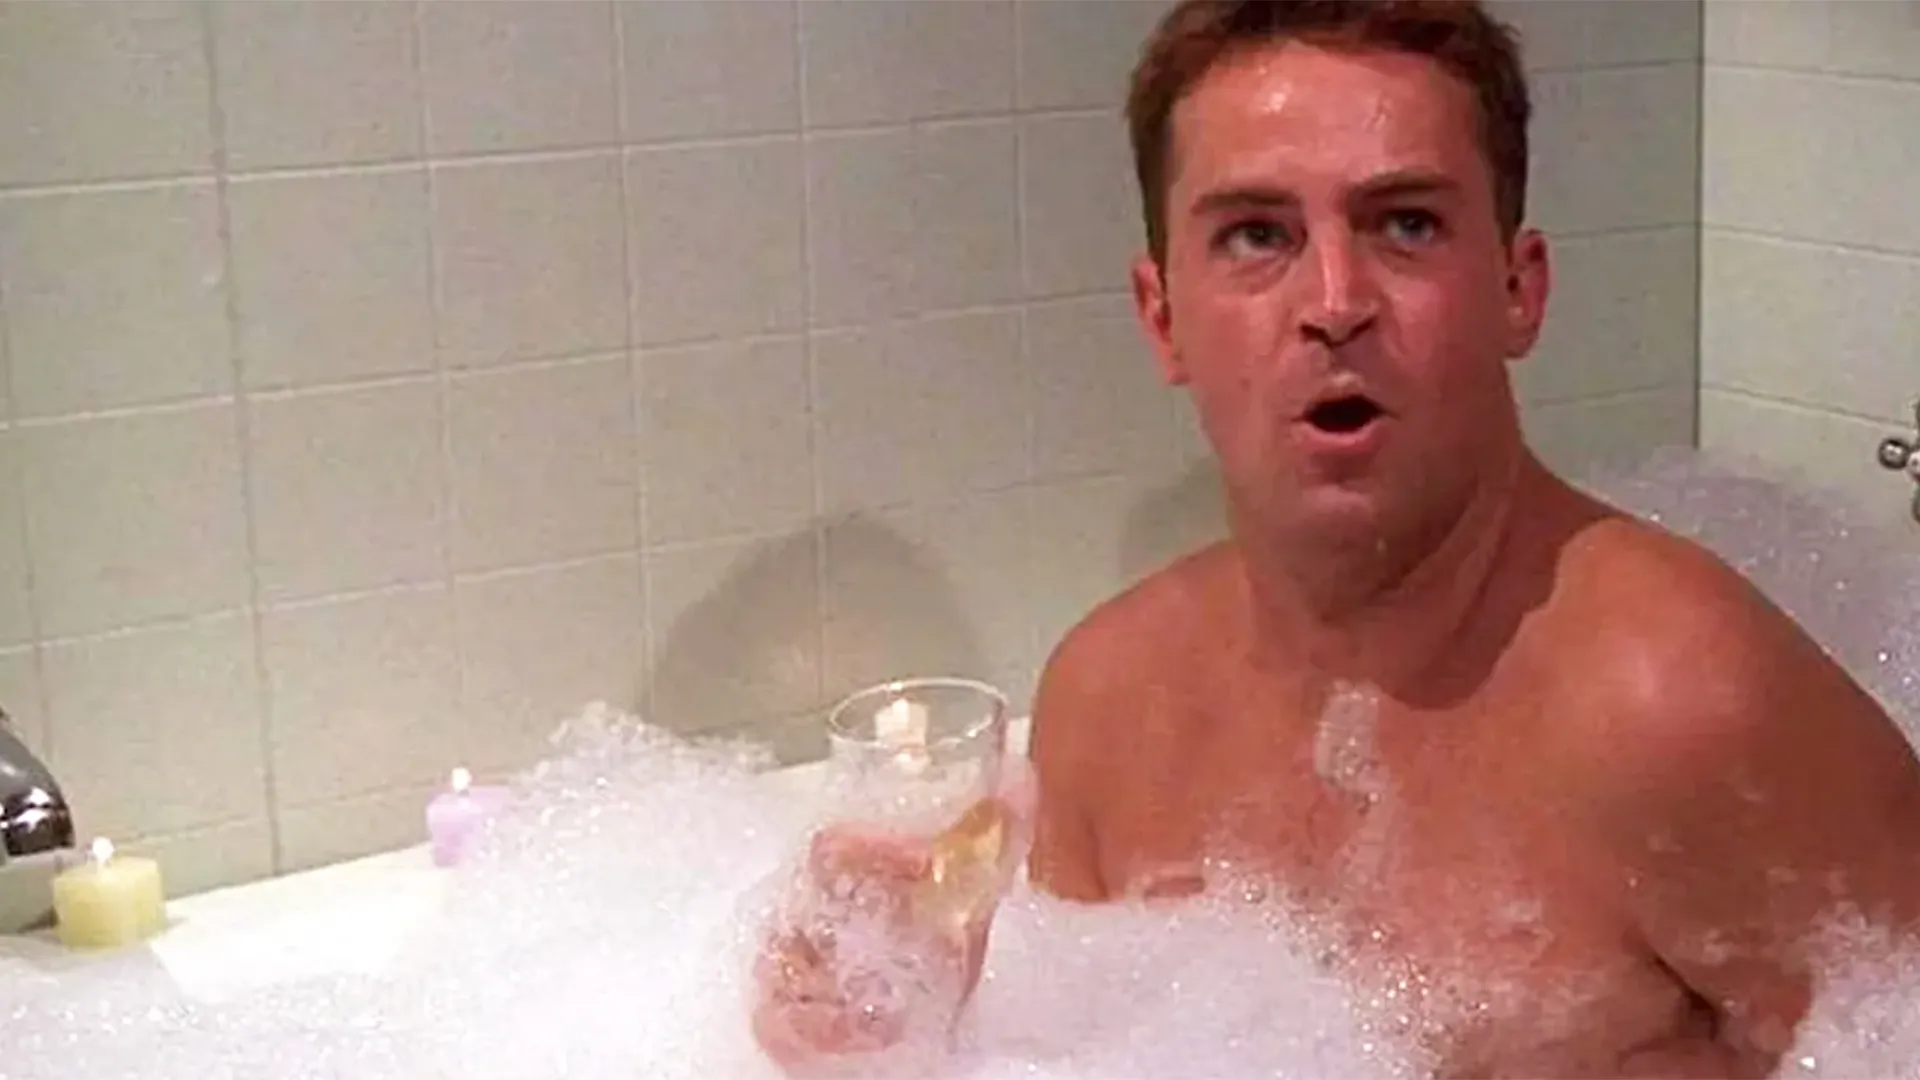 A man taking a bubble bath and having a glass of wine